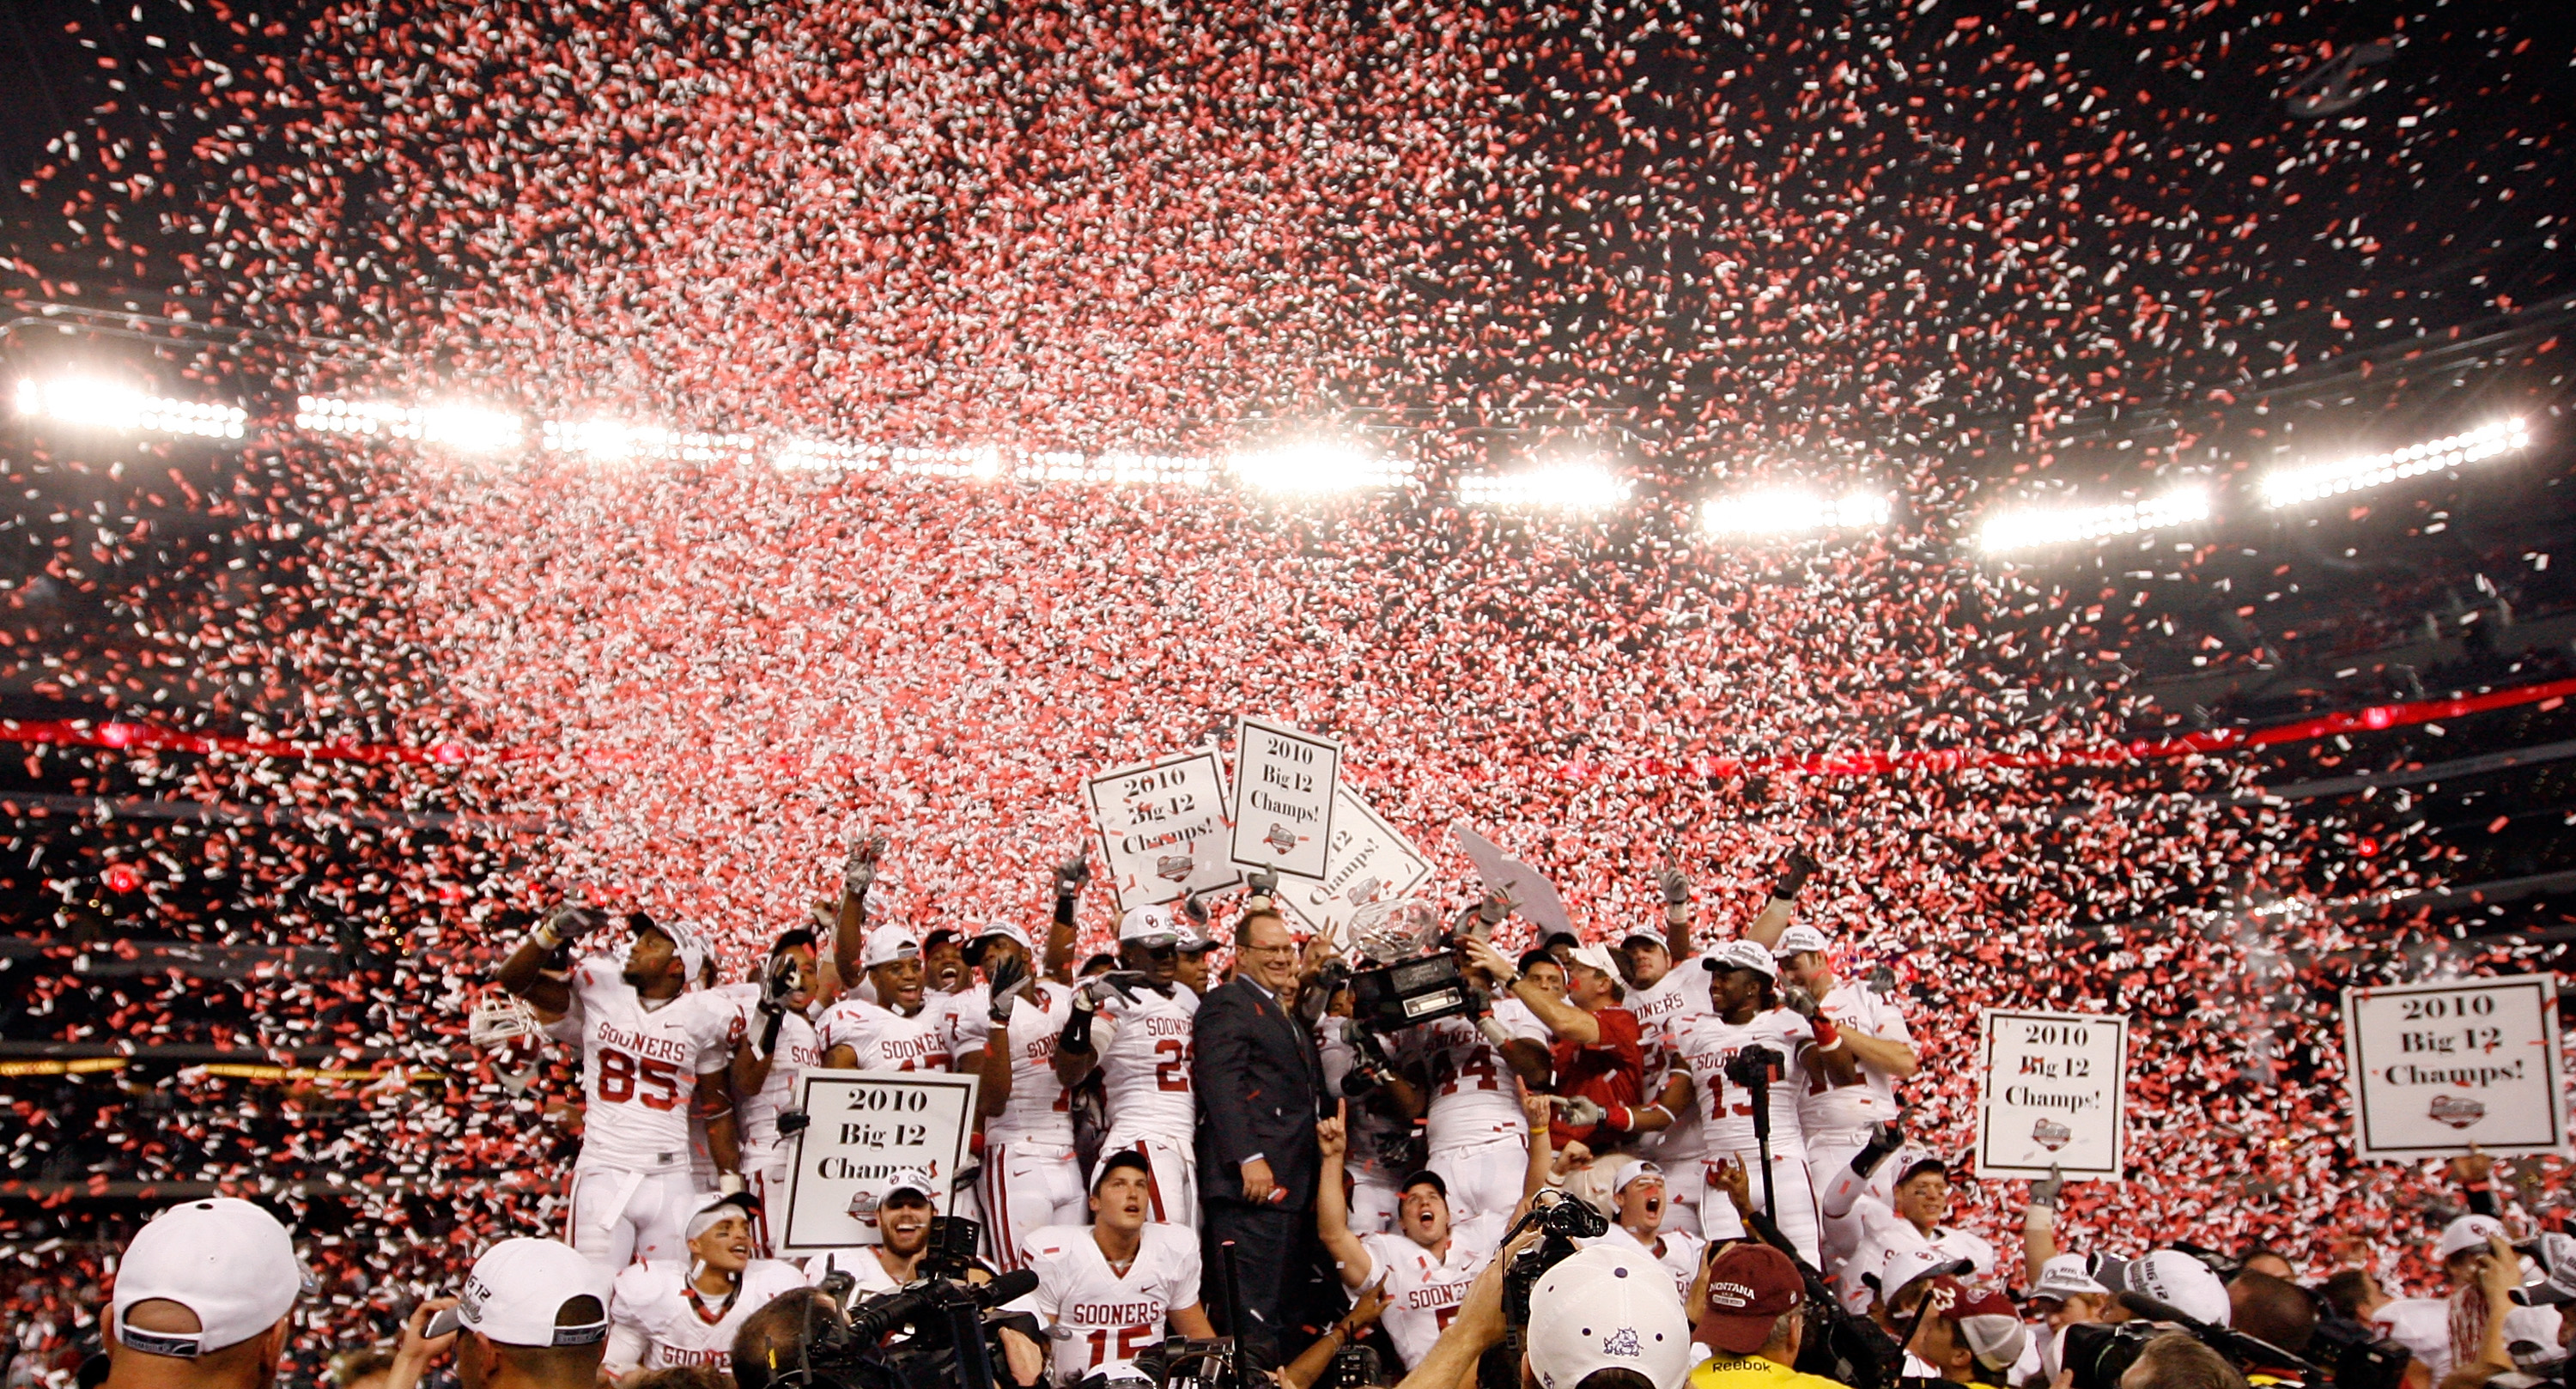 ARLINGTON, TX - DECEMBER 04:  The Oklahoma Sooners celebrates with the Big 12 Championship Trophy after the Sooners beat the Nebraska Cornhuskers 23-20 at Cowboys Stadium on December 4, 2010 in Arlington, Texas.  (Photo by Tom Pennington/Getty Images)